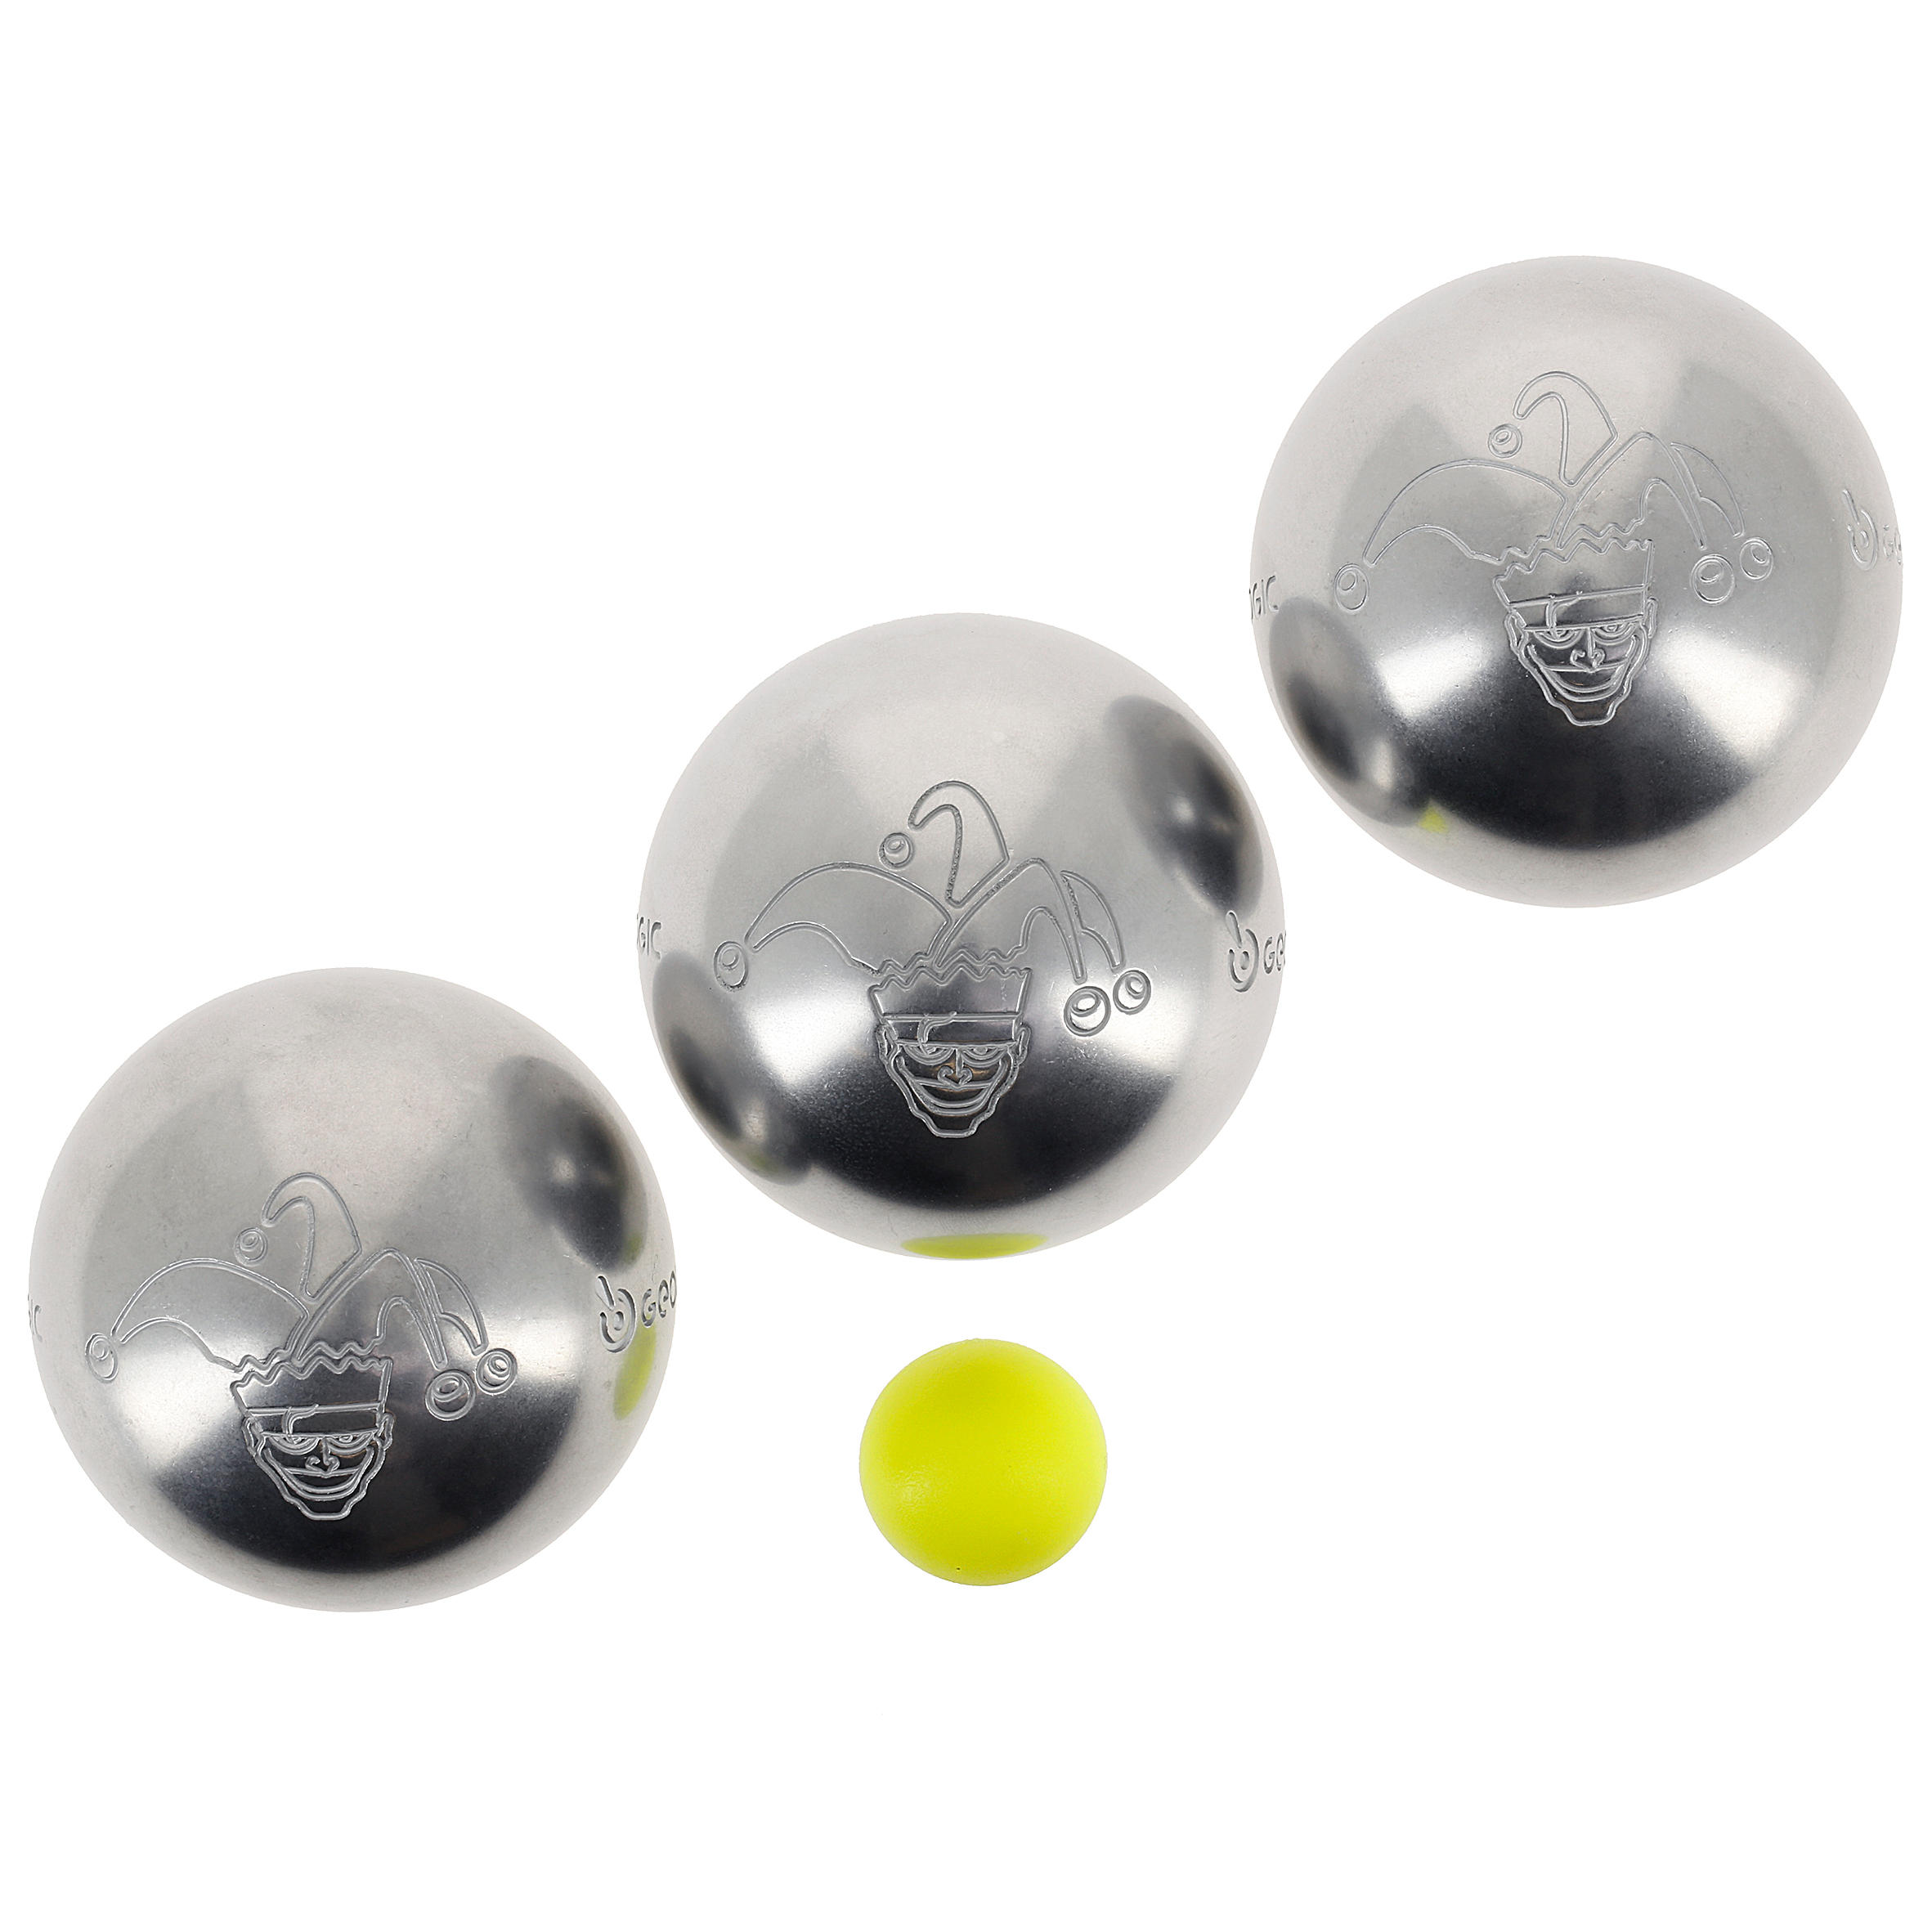 GEOLOGIC Bocce pétanque DISCOVERY 300 JESTER x3